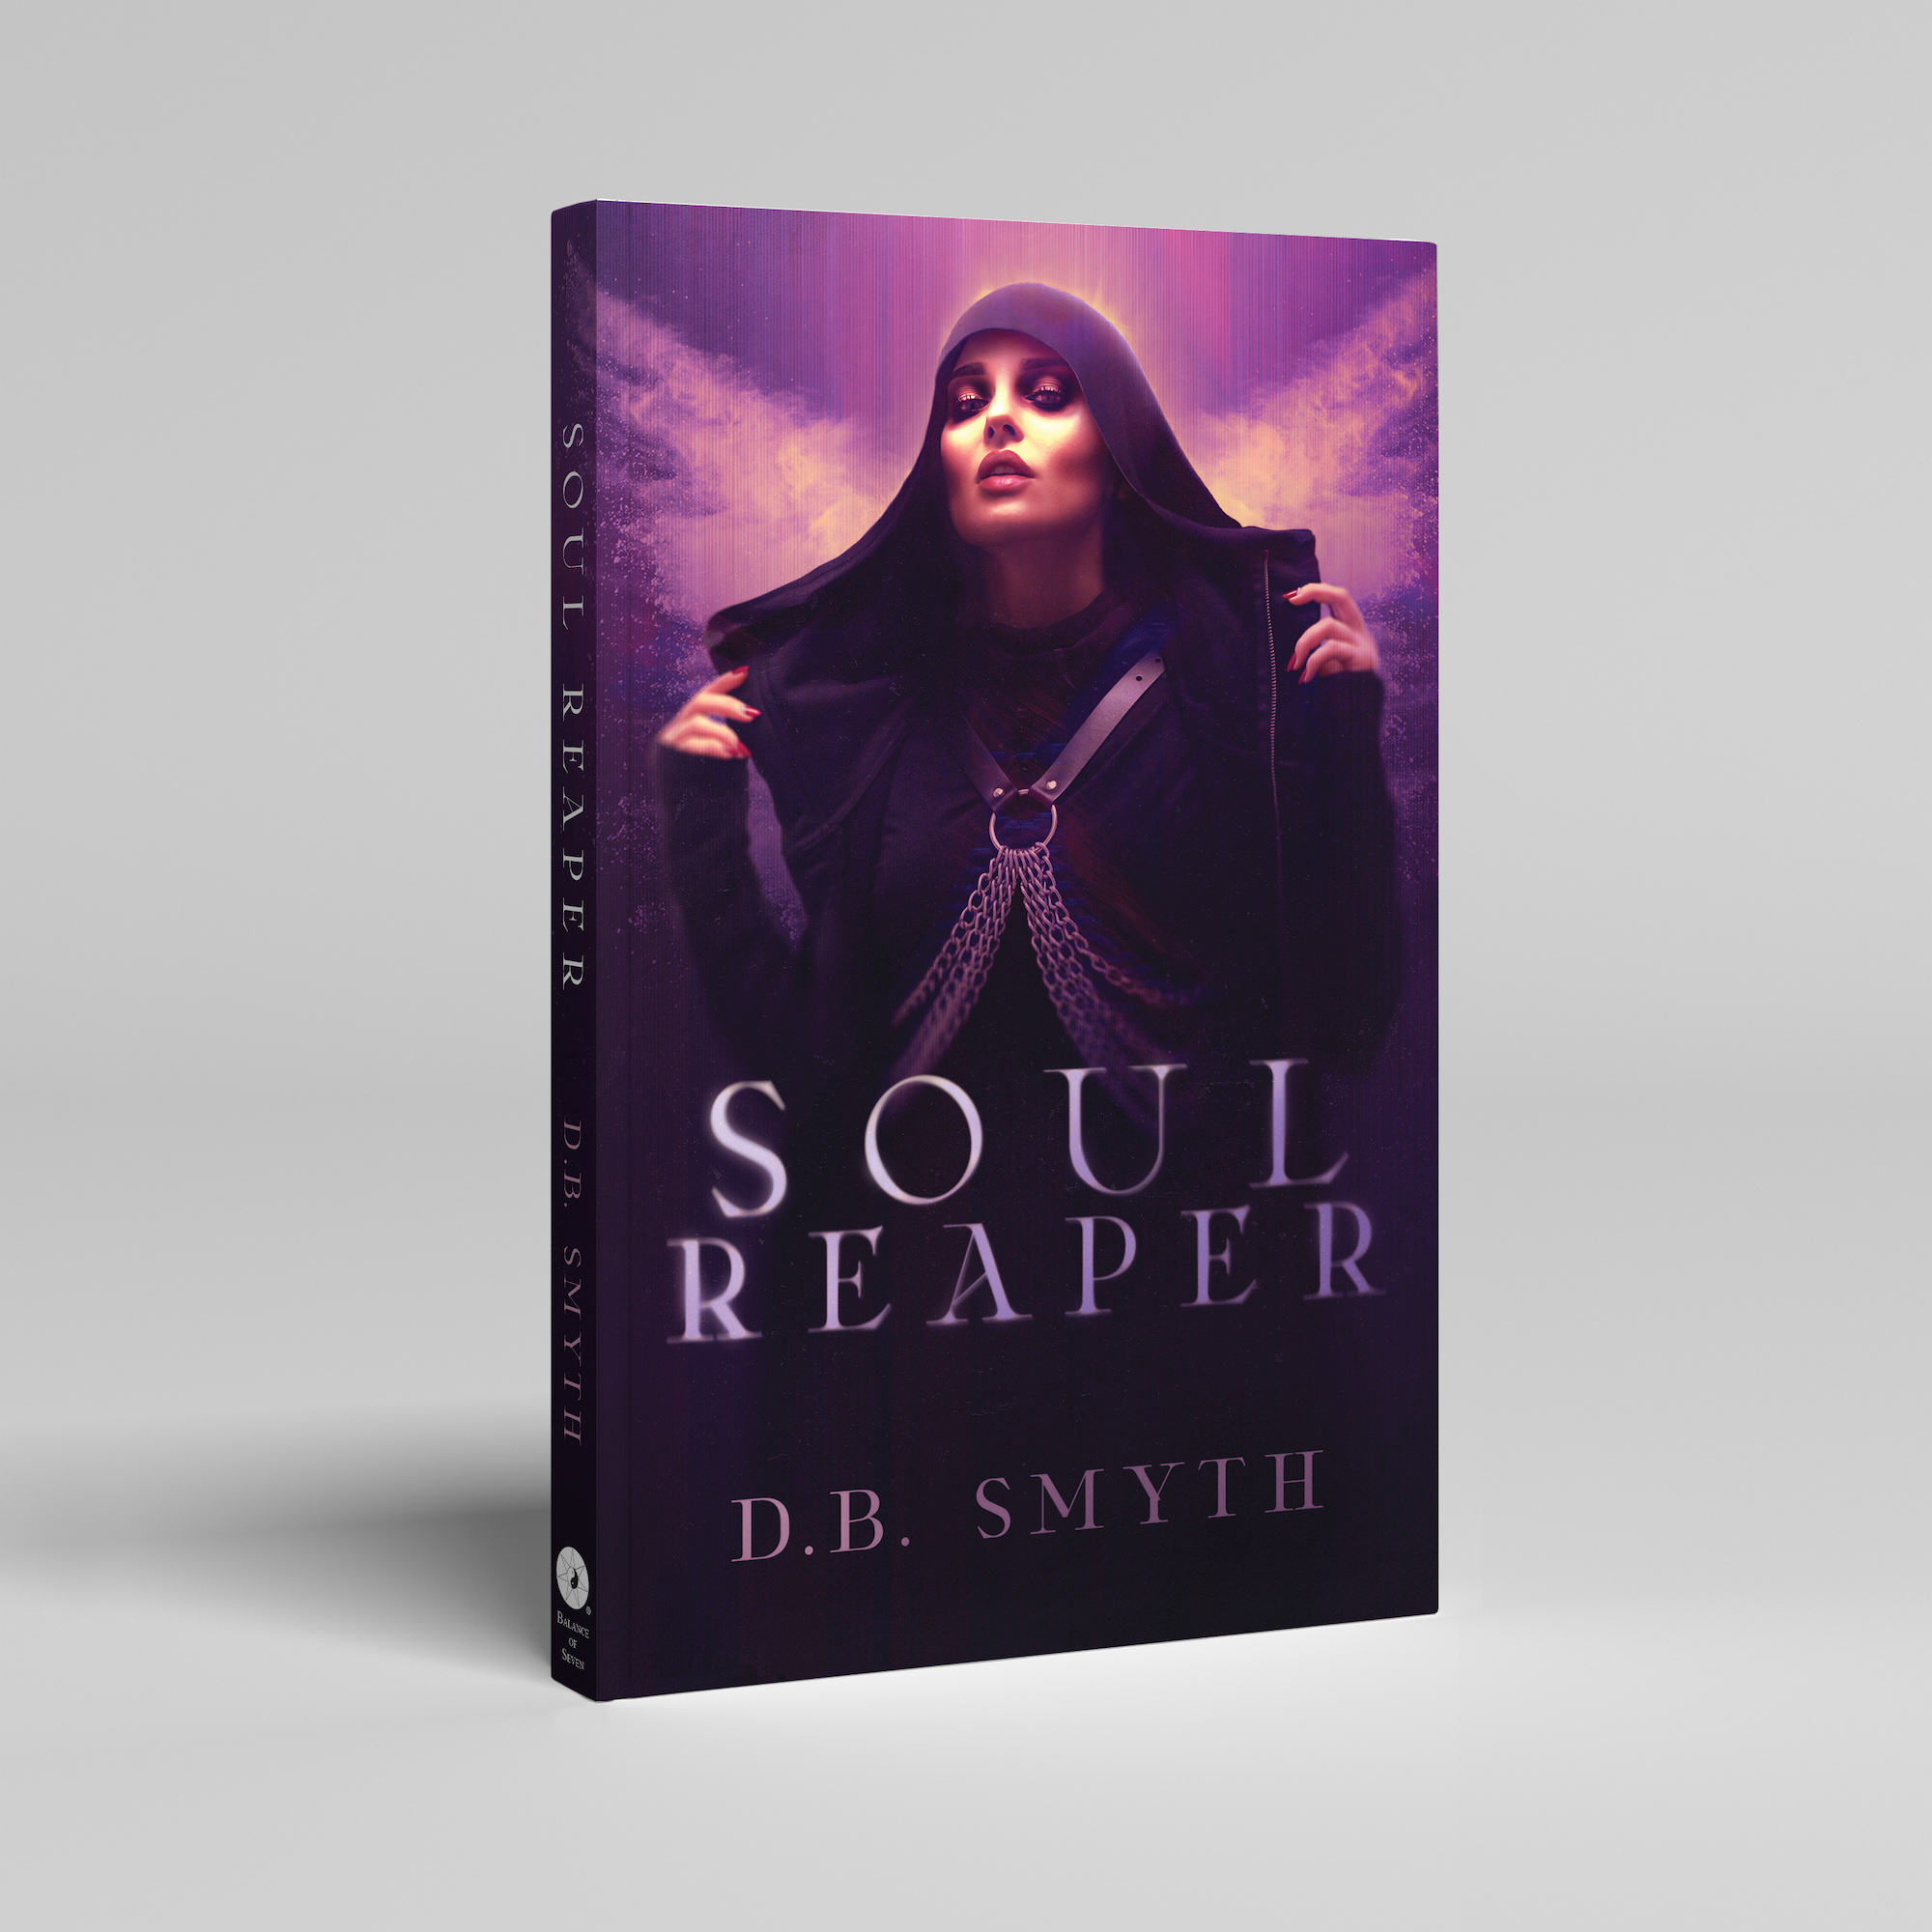 Image of novel with woman on cover. Text reads, Soul Reaper by D.B. Smyth.